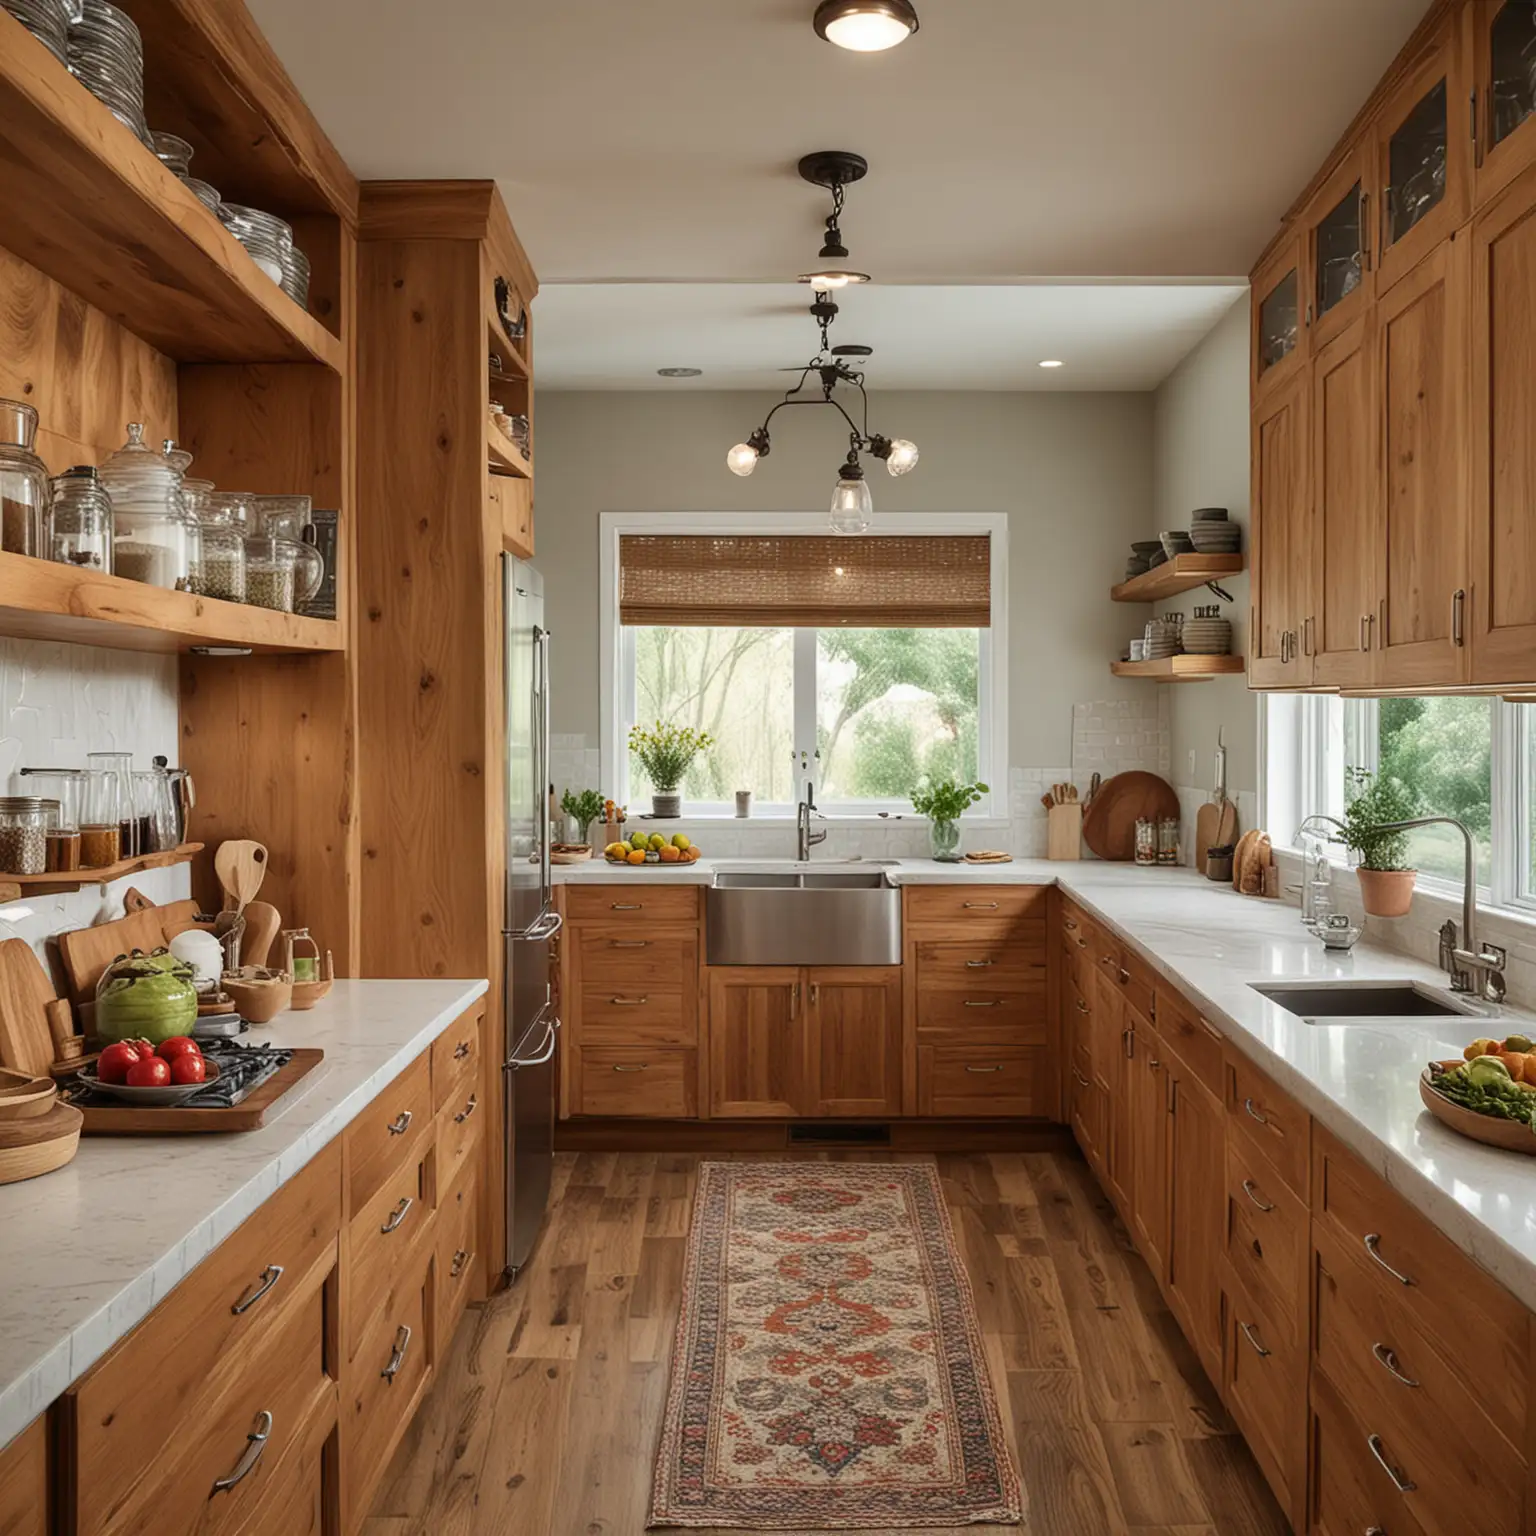 a modern kitchen design with wooden cabinets  Layout: Galley style Decor: Decorative plates and glass jars